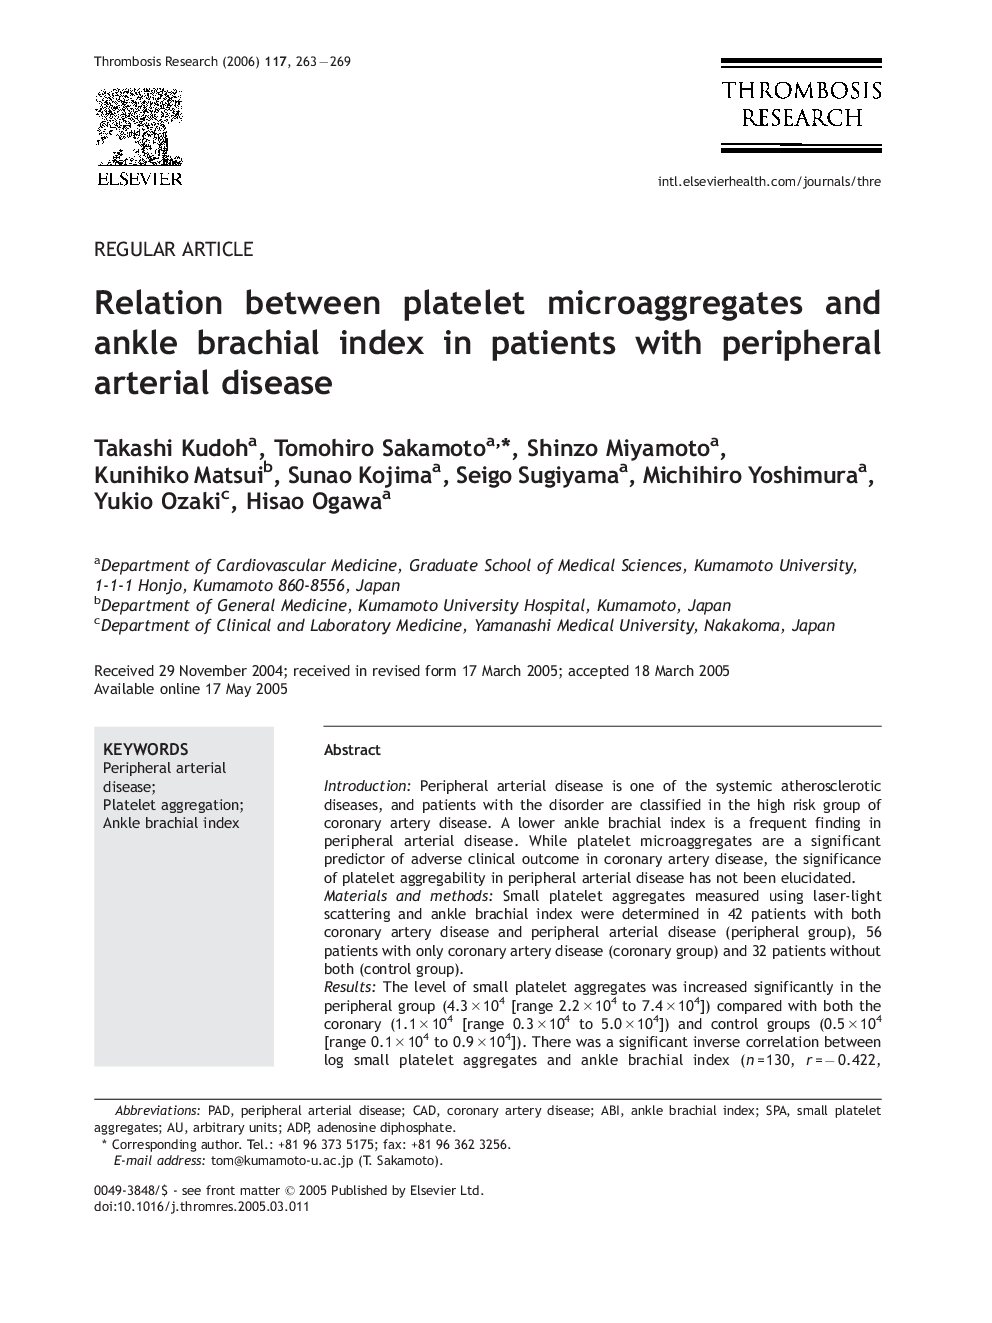 Relation between platelet microaggregates and ankle brachial index in patients with peripheral arterial disease